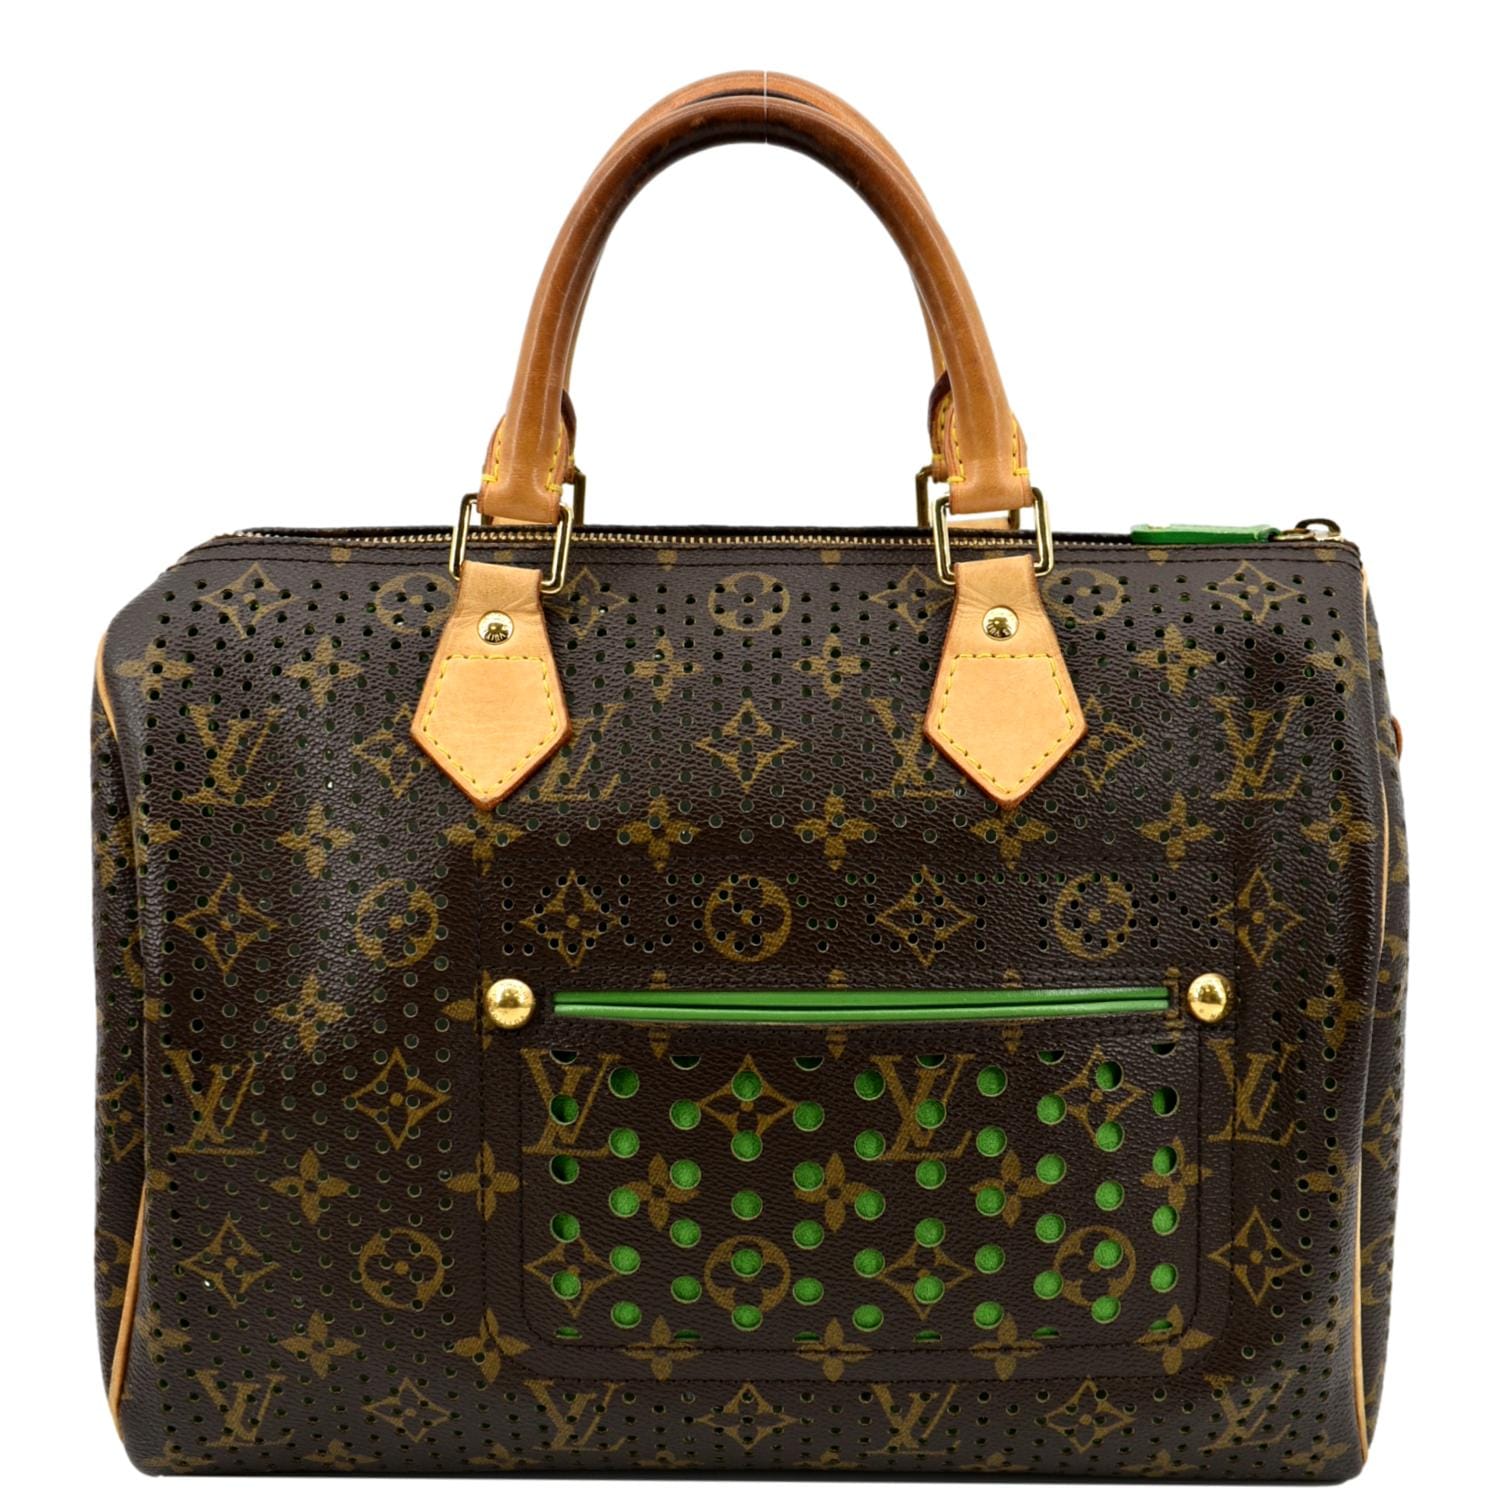 Louis+Vuitton+Saumur+Clutch+Brown+Leather+Monogram+Perforated for